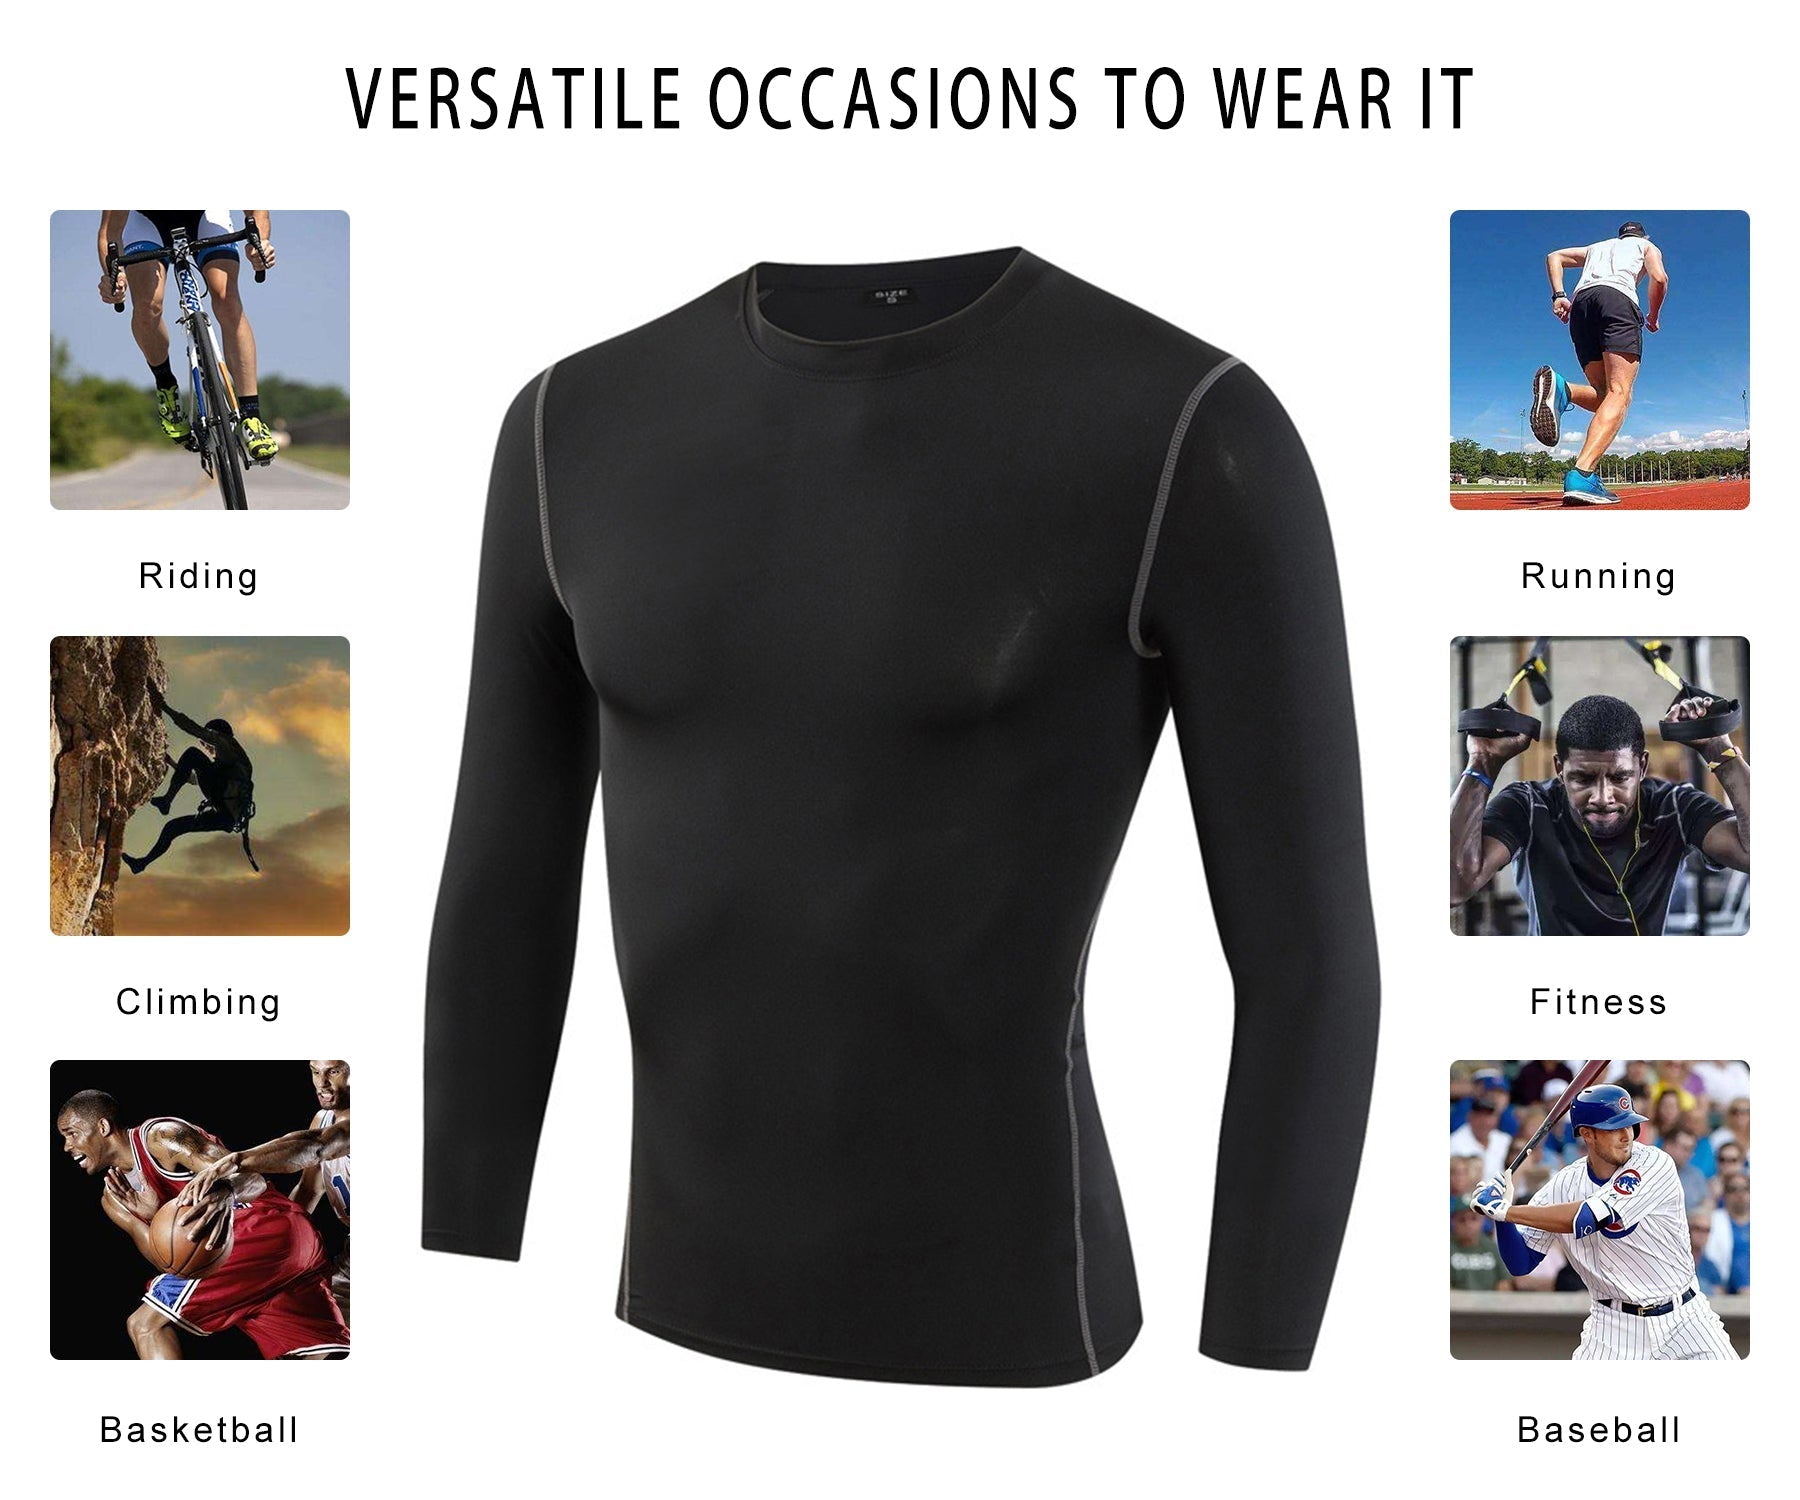 Men's Compression Shirts Long Sleeve Workout Dry Fit T Shirt Athletic  Baselayers Running Shirts for Men, Black